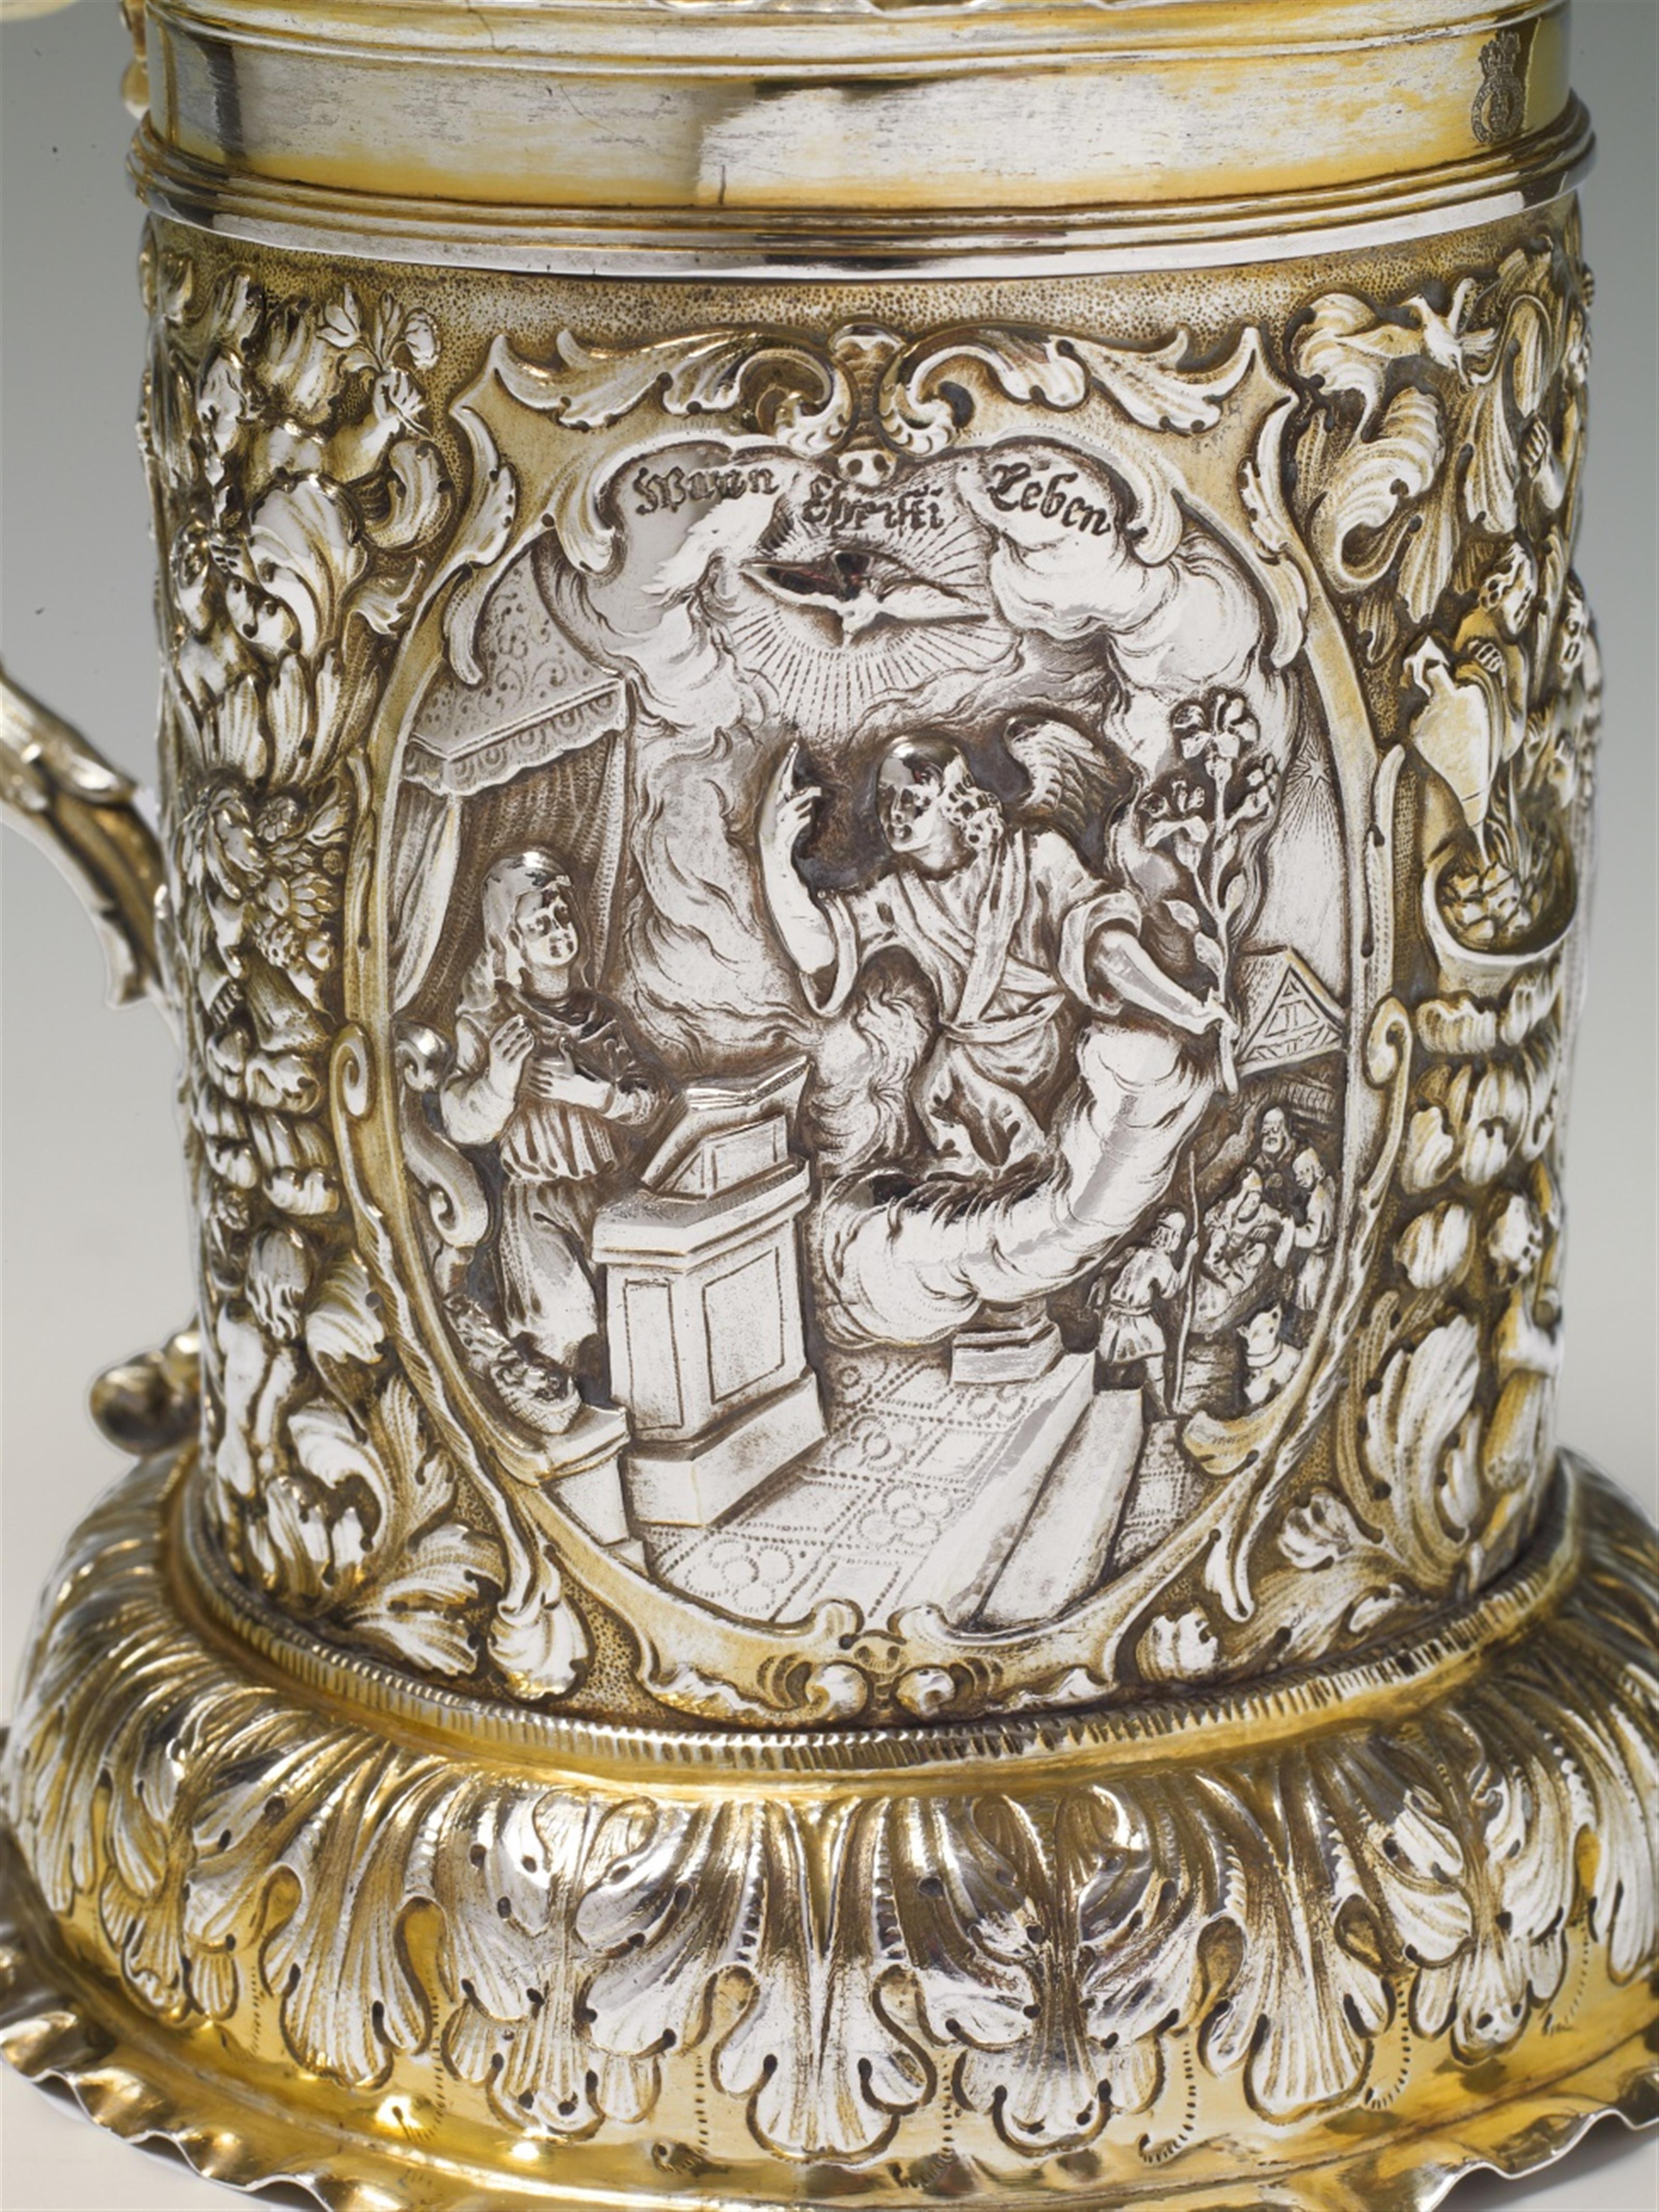 A Nuremberg silver gilt tankard. Of cylindrical form on a bulbous base, the rim moulded and the volute handle decorated with a female herm. The body engraved and embossed with biblical scenes in three oval reserves: 1. The creation of Eve, 2. The annuncia - image-2